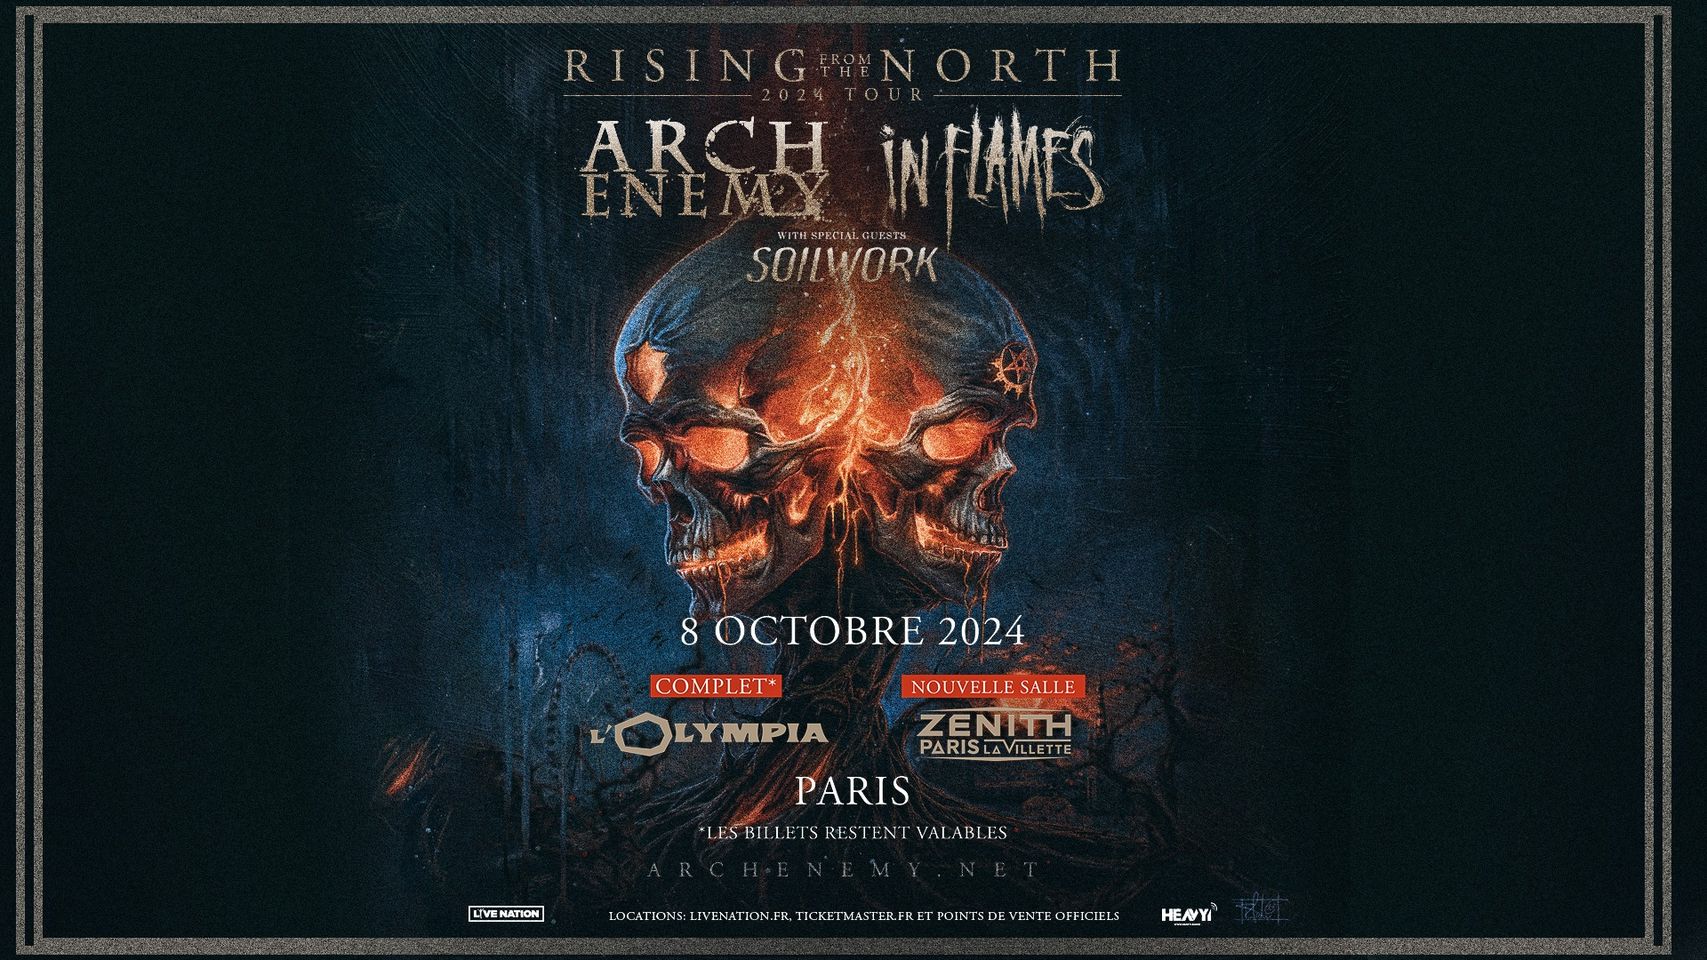 Arch Enemy - In Flames at Zenith Paris Tickets